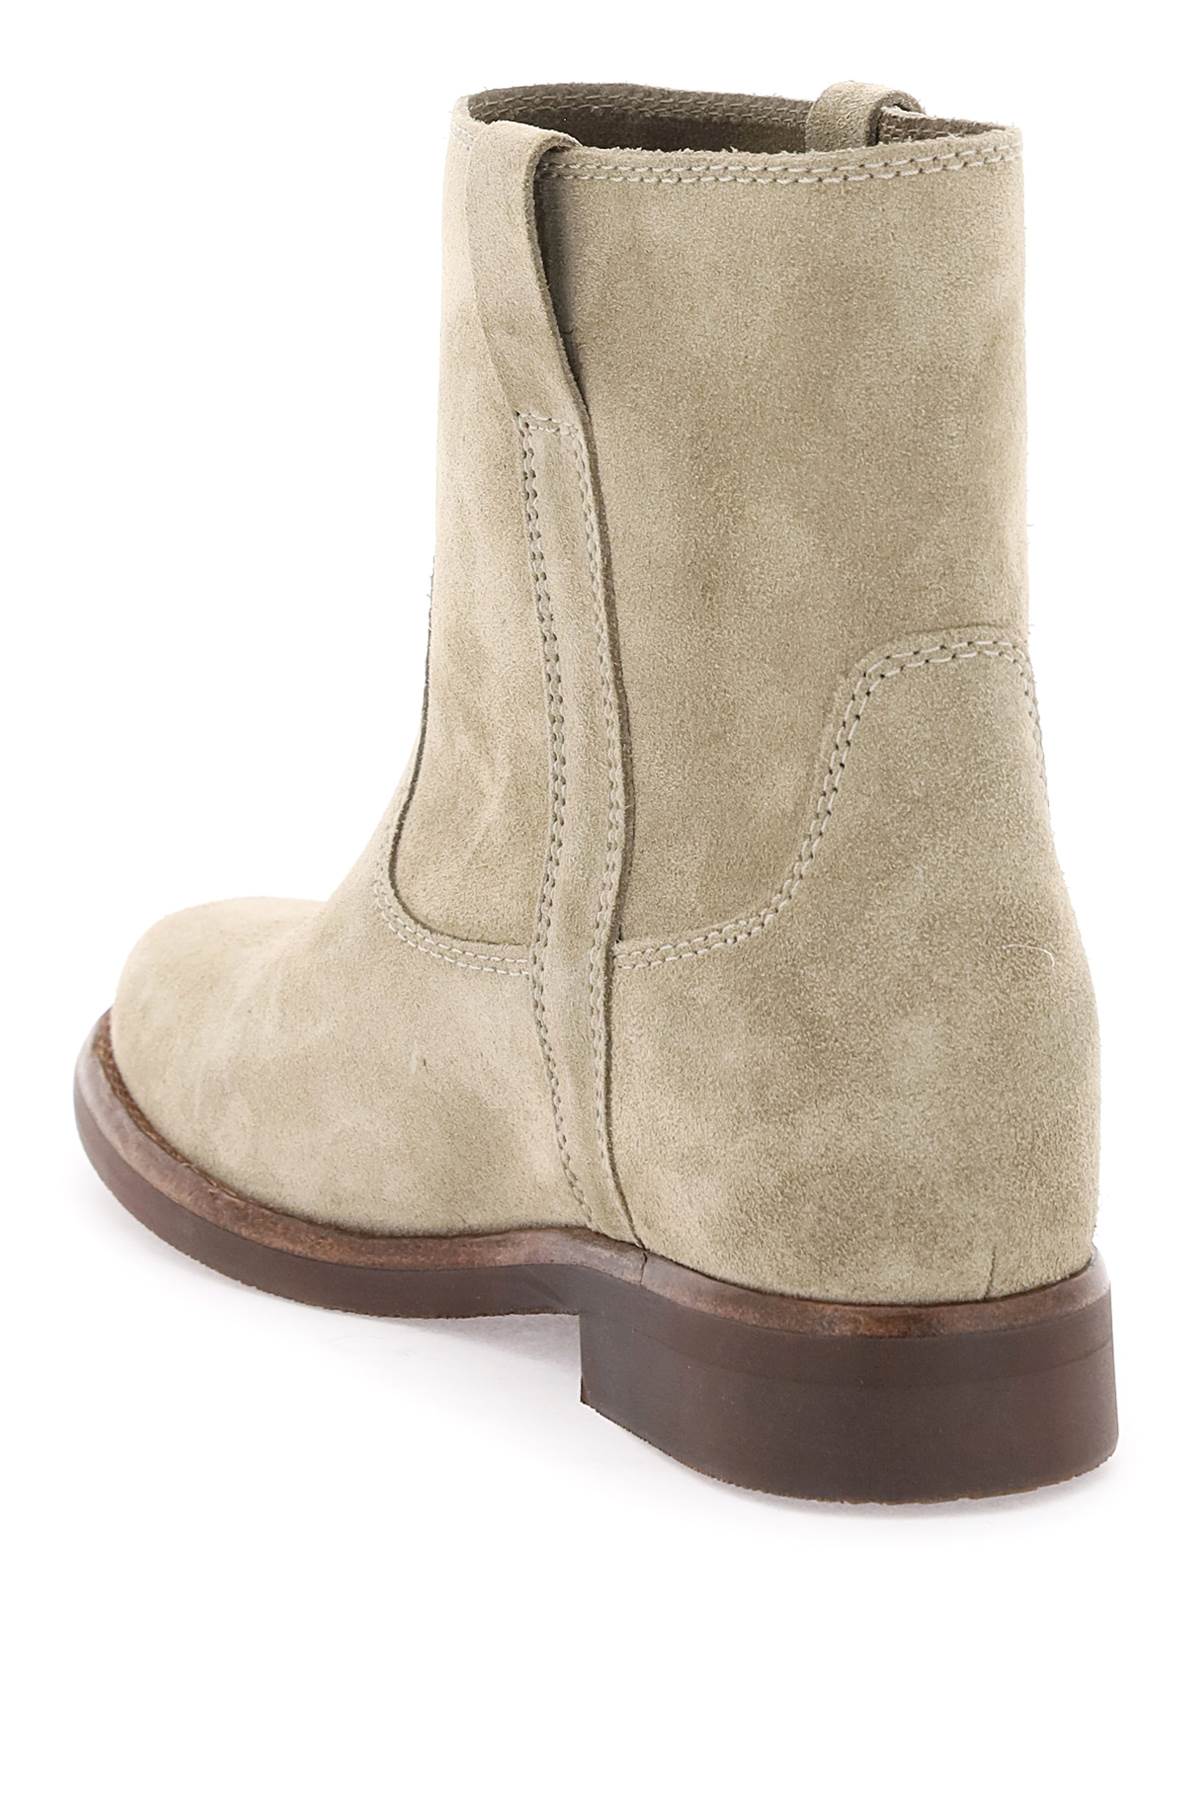 ISABEL MARANT 'SUSEE' ANKLE BOOTS